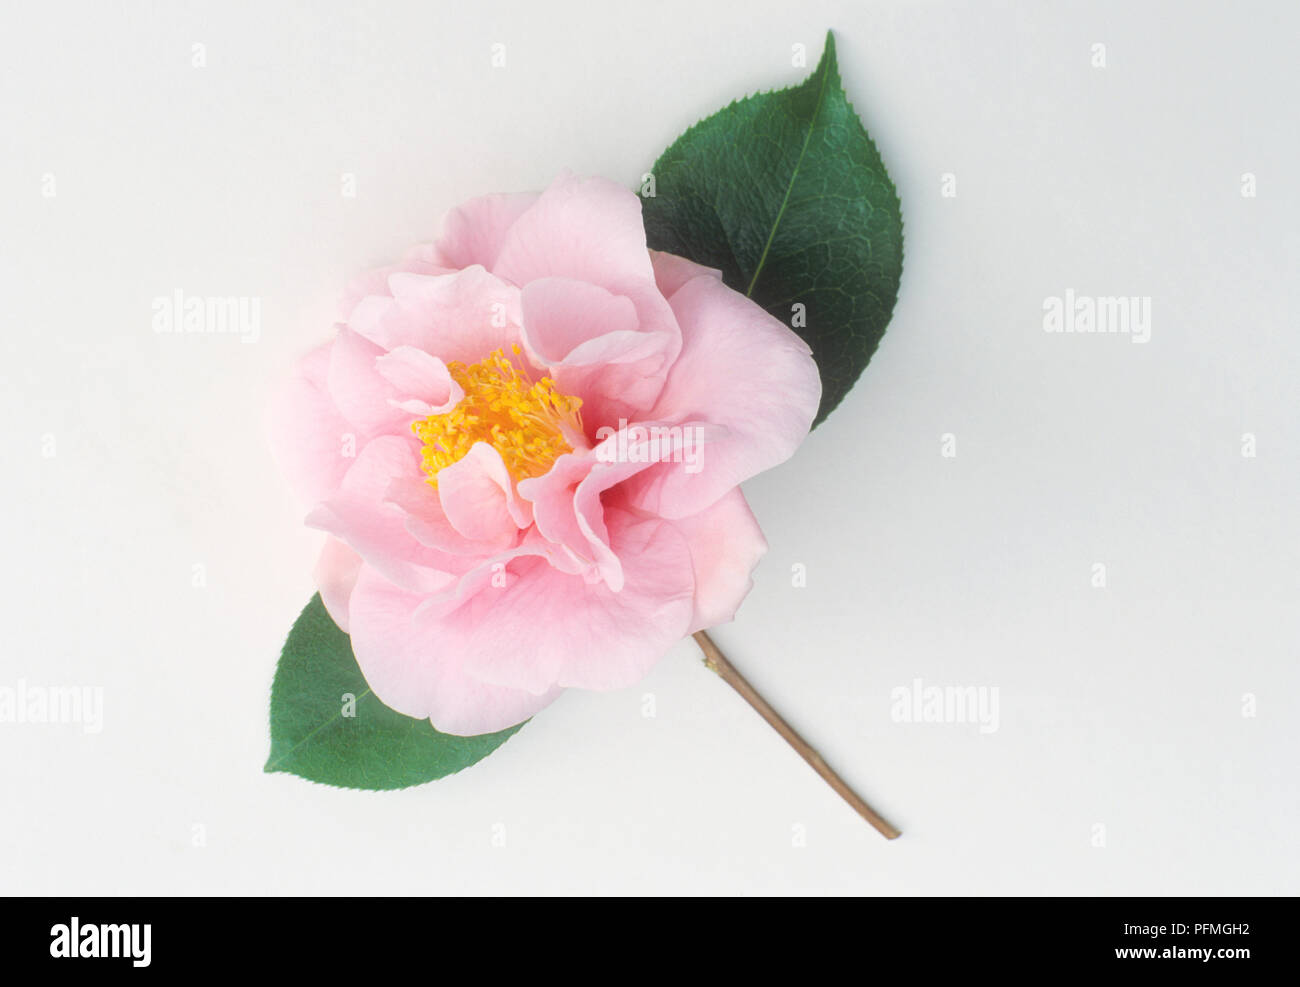 Camellia 'Lila Naff', pale pink semi-double flower with yellow stamen and green leaves Stock Photo